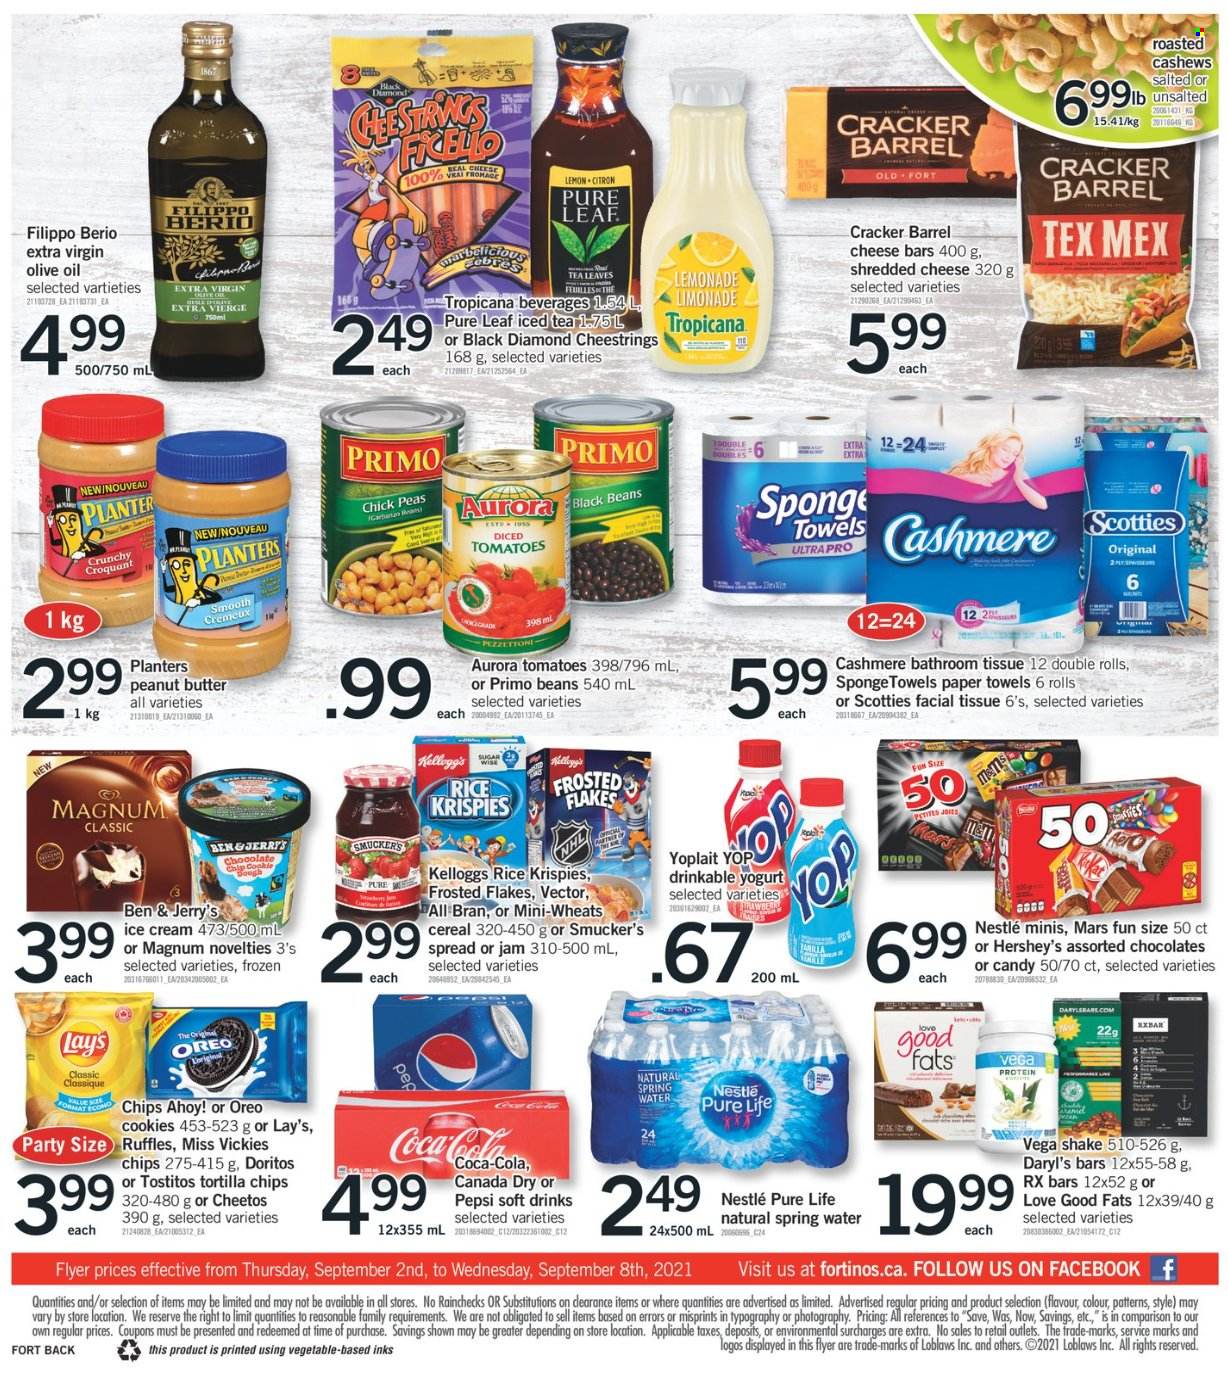 thumbnail - Fortinos Flyer - September 02, 2021 - September 08, 2021 - Sales products - beans, tomatoes, peas, shredded cheese, string cheese, yoghurt, Yoplait, shake, Magnum, ice cream, Hershey's, Ben & Jerry's, cookies, Mars, crackers, Chips Ahoy!, Doritos, tortilla chips, Cheetos, Lay’s, Ruffles, Tostitos, black beans, cereals, Rice Krispies, Frosted Flakes, extra virgin olive oil, olive oil, oil, fruit jam, peanut butter, cashews, Planters, Canada Dry, Coca-Cola, lemonade, Pepsi, ice tea, soft drink, spring water, Pure Leaf, bath tissue, kitchen towels, paper towels, sponge, Oreo, Nestlé. Page 2.